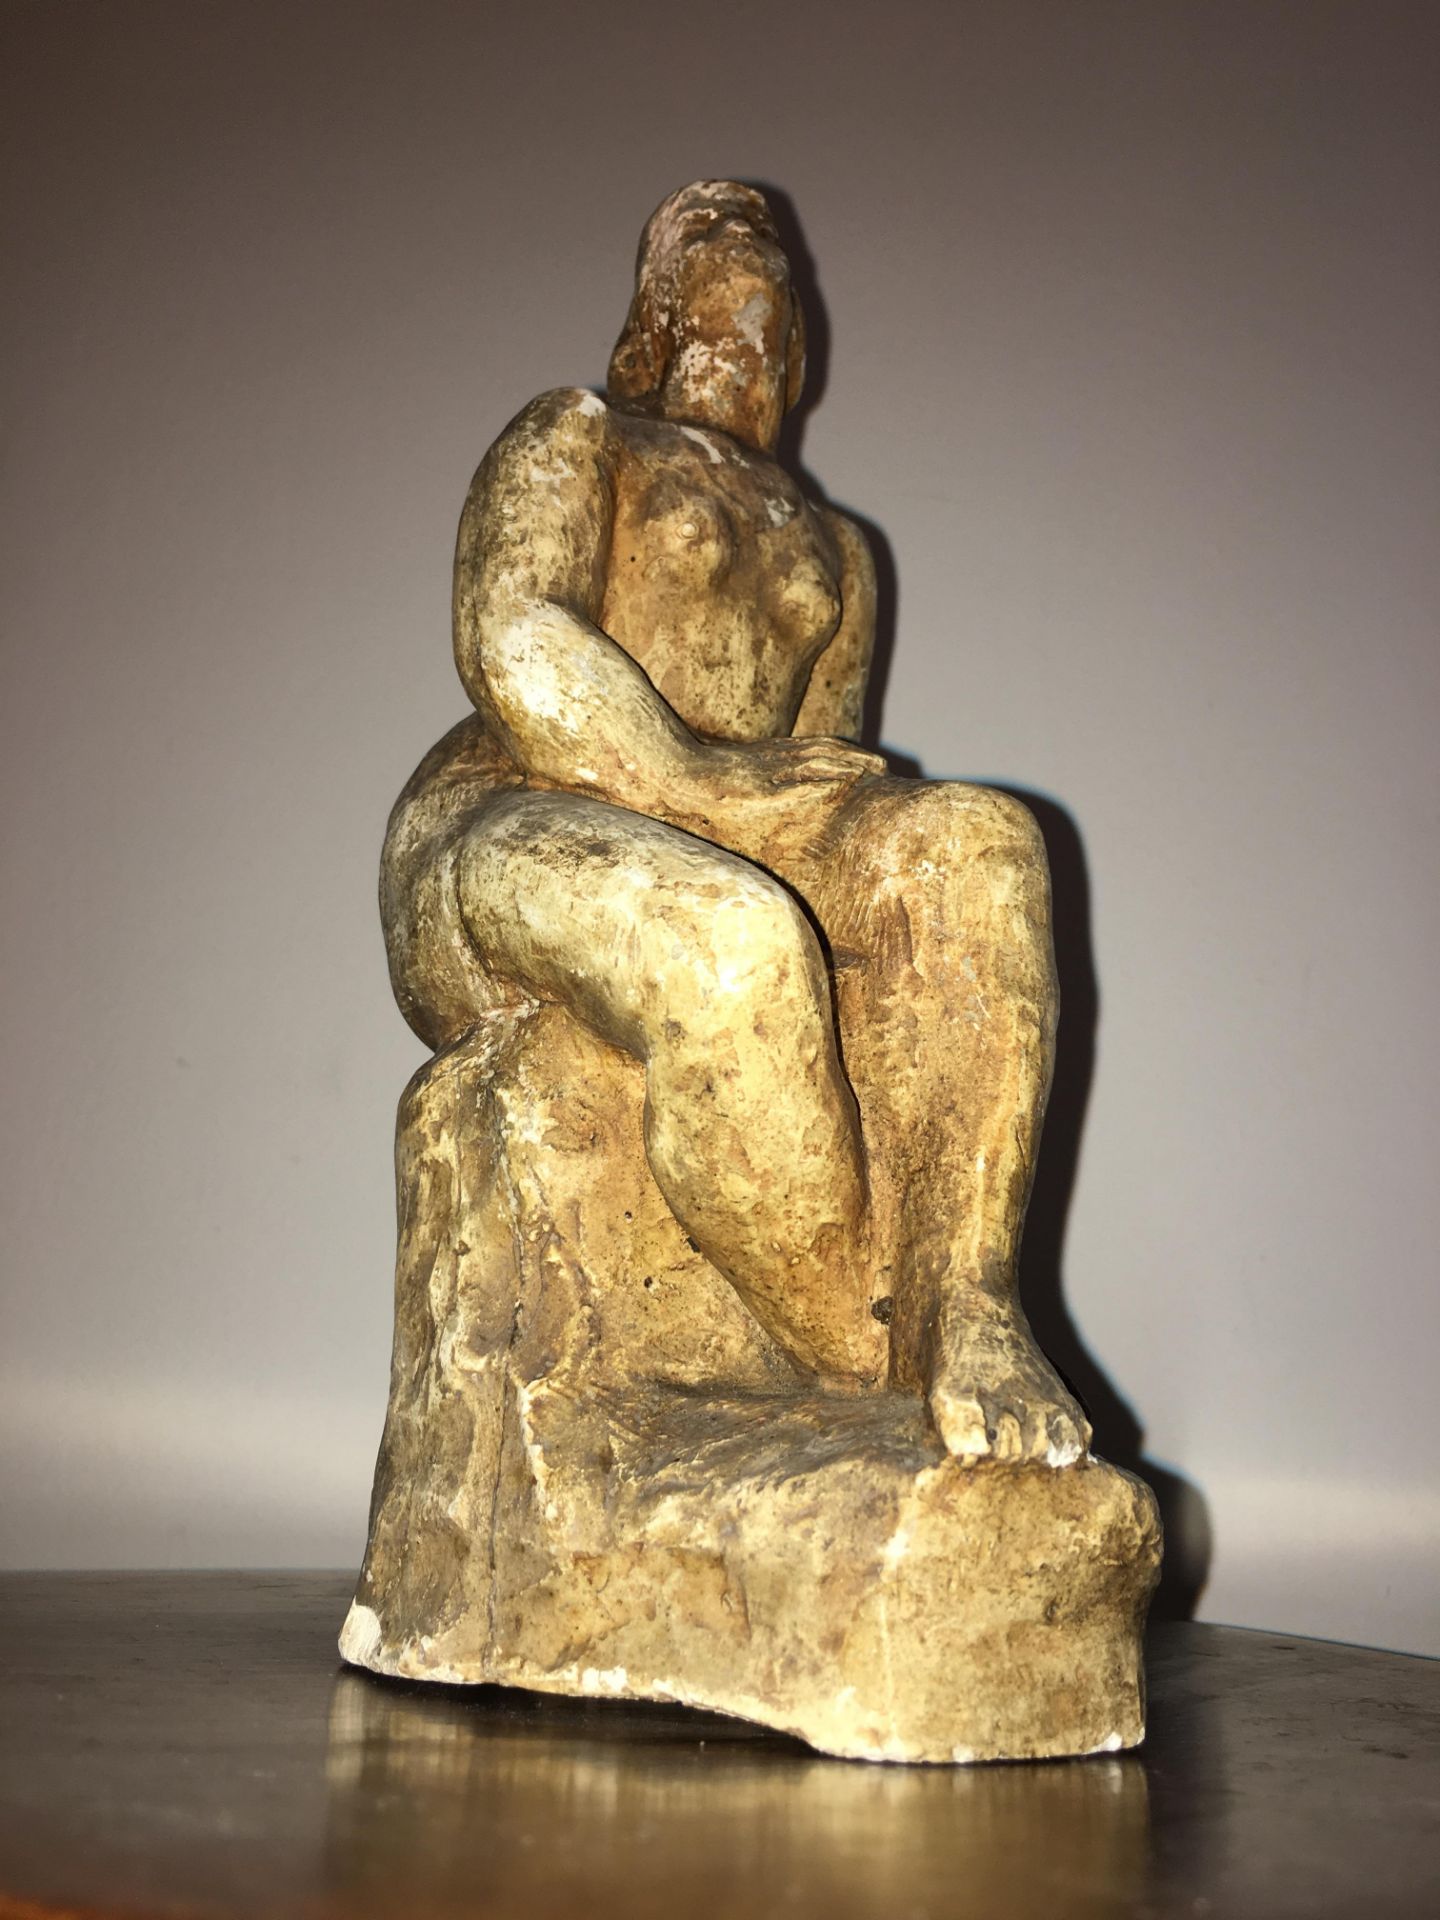 Seated female plaster sculpture signed by Marek Szwarc 1892-1958 - Image 3 of 6